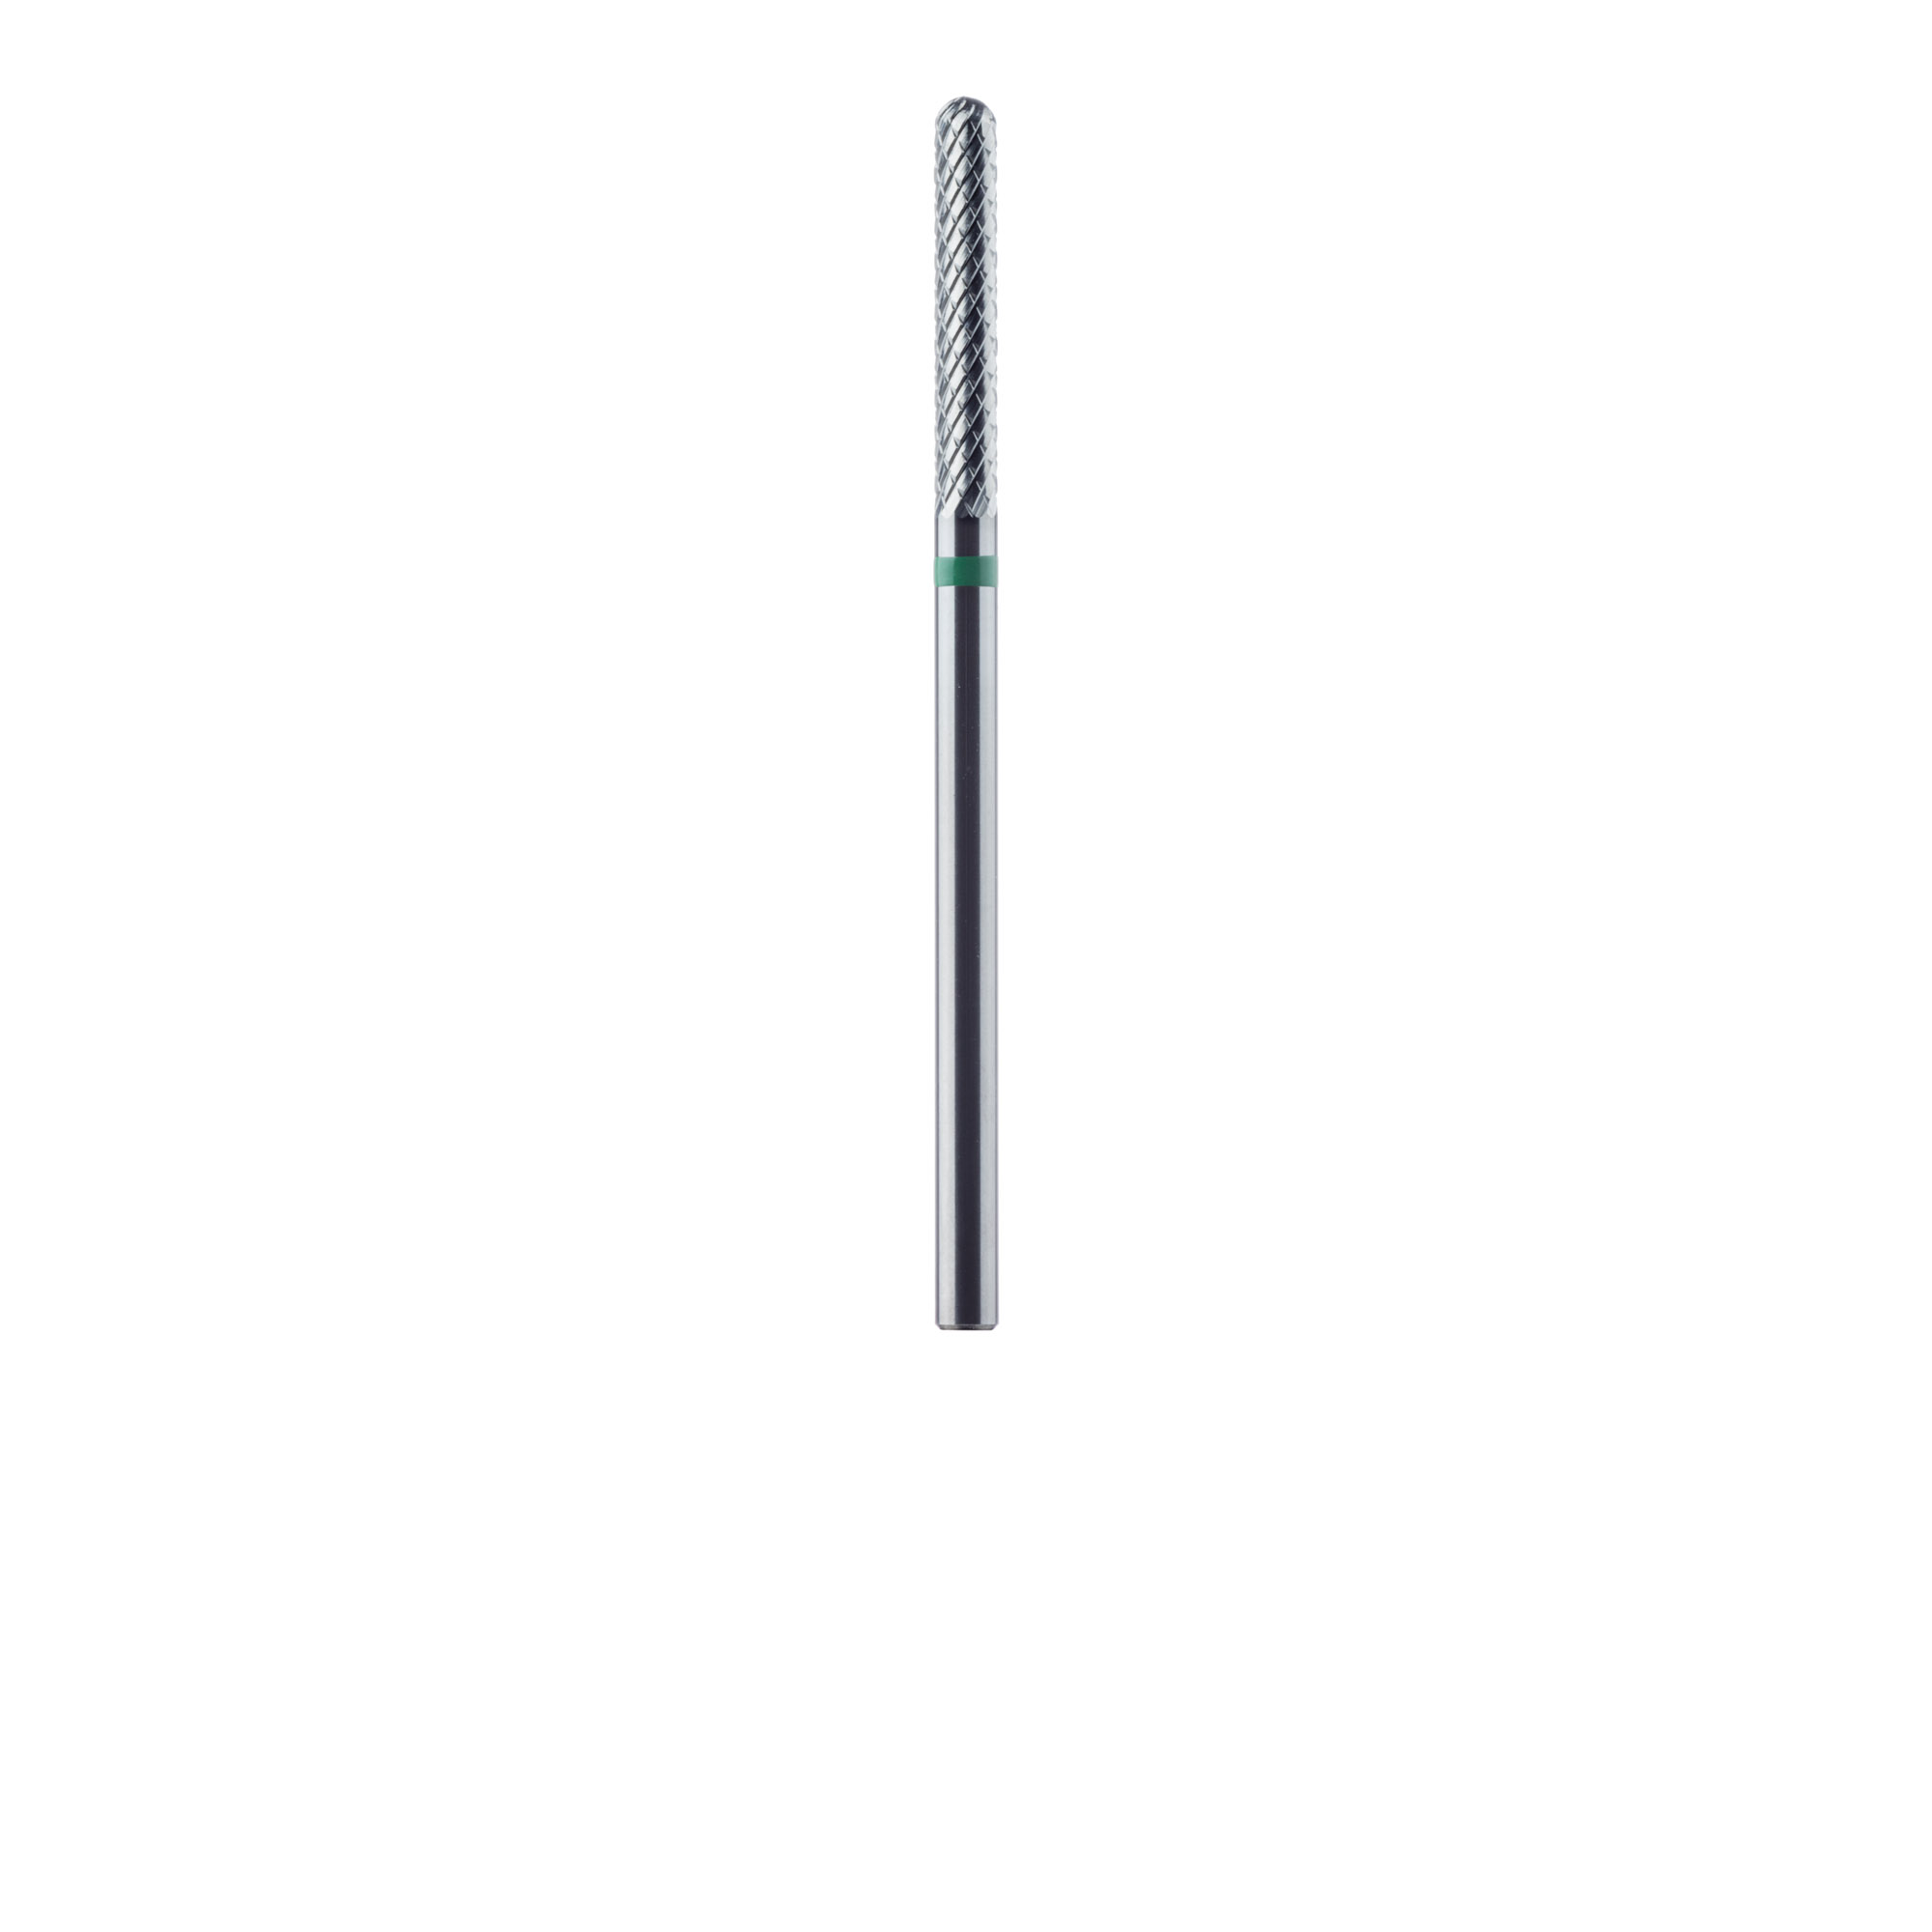 HM486HT-023-HP Laboratory Carbide Bur, Coarse, Special Toothing for Titanium, 2.3mm Ø, HP